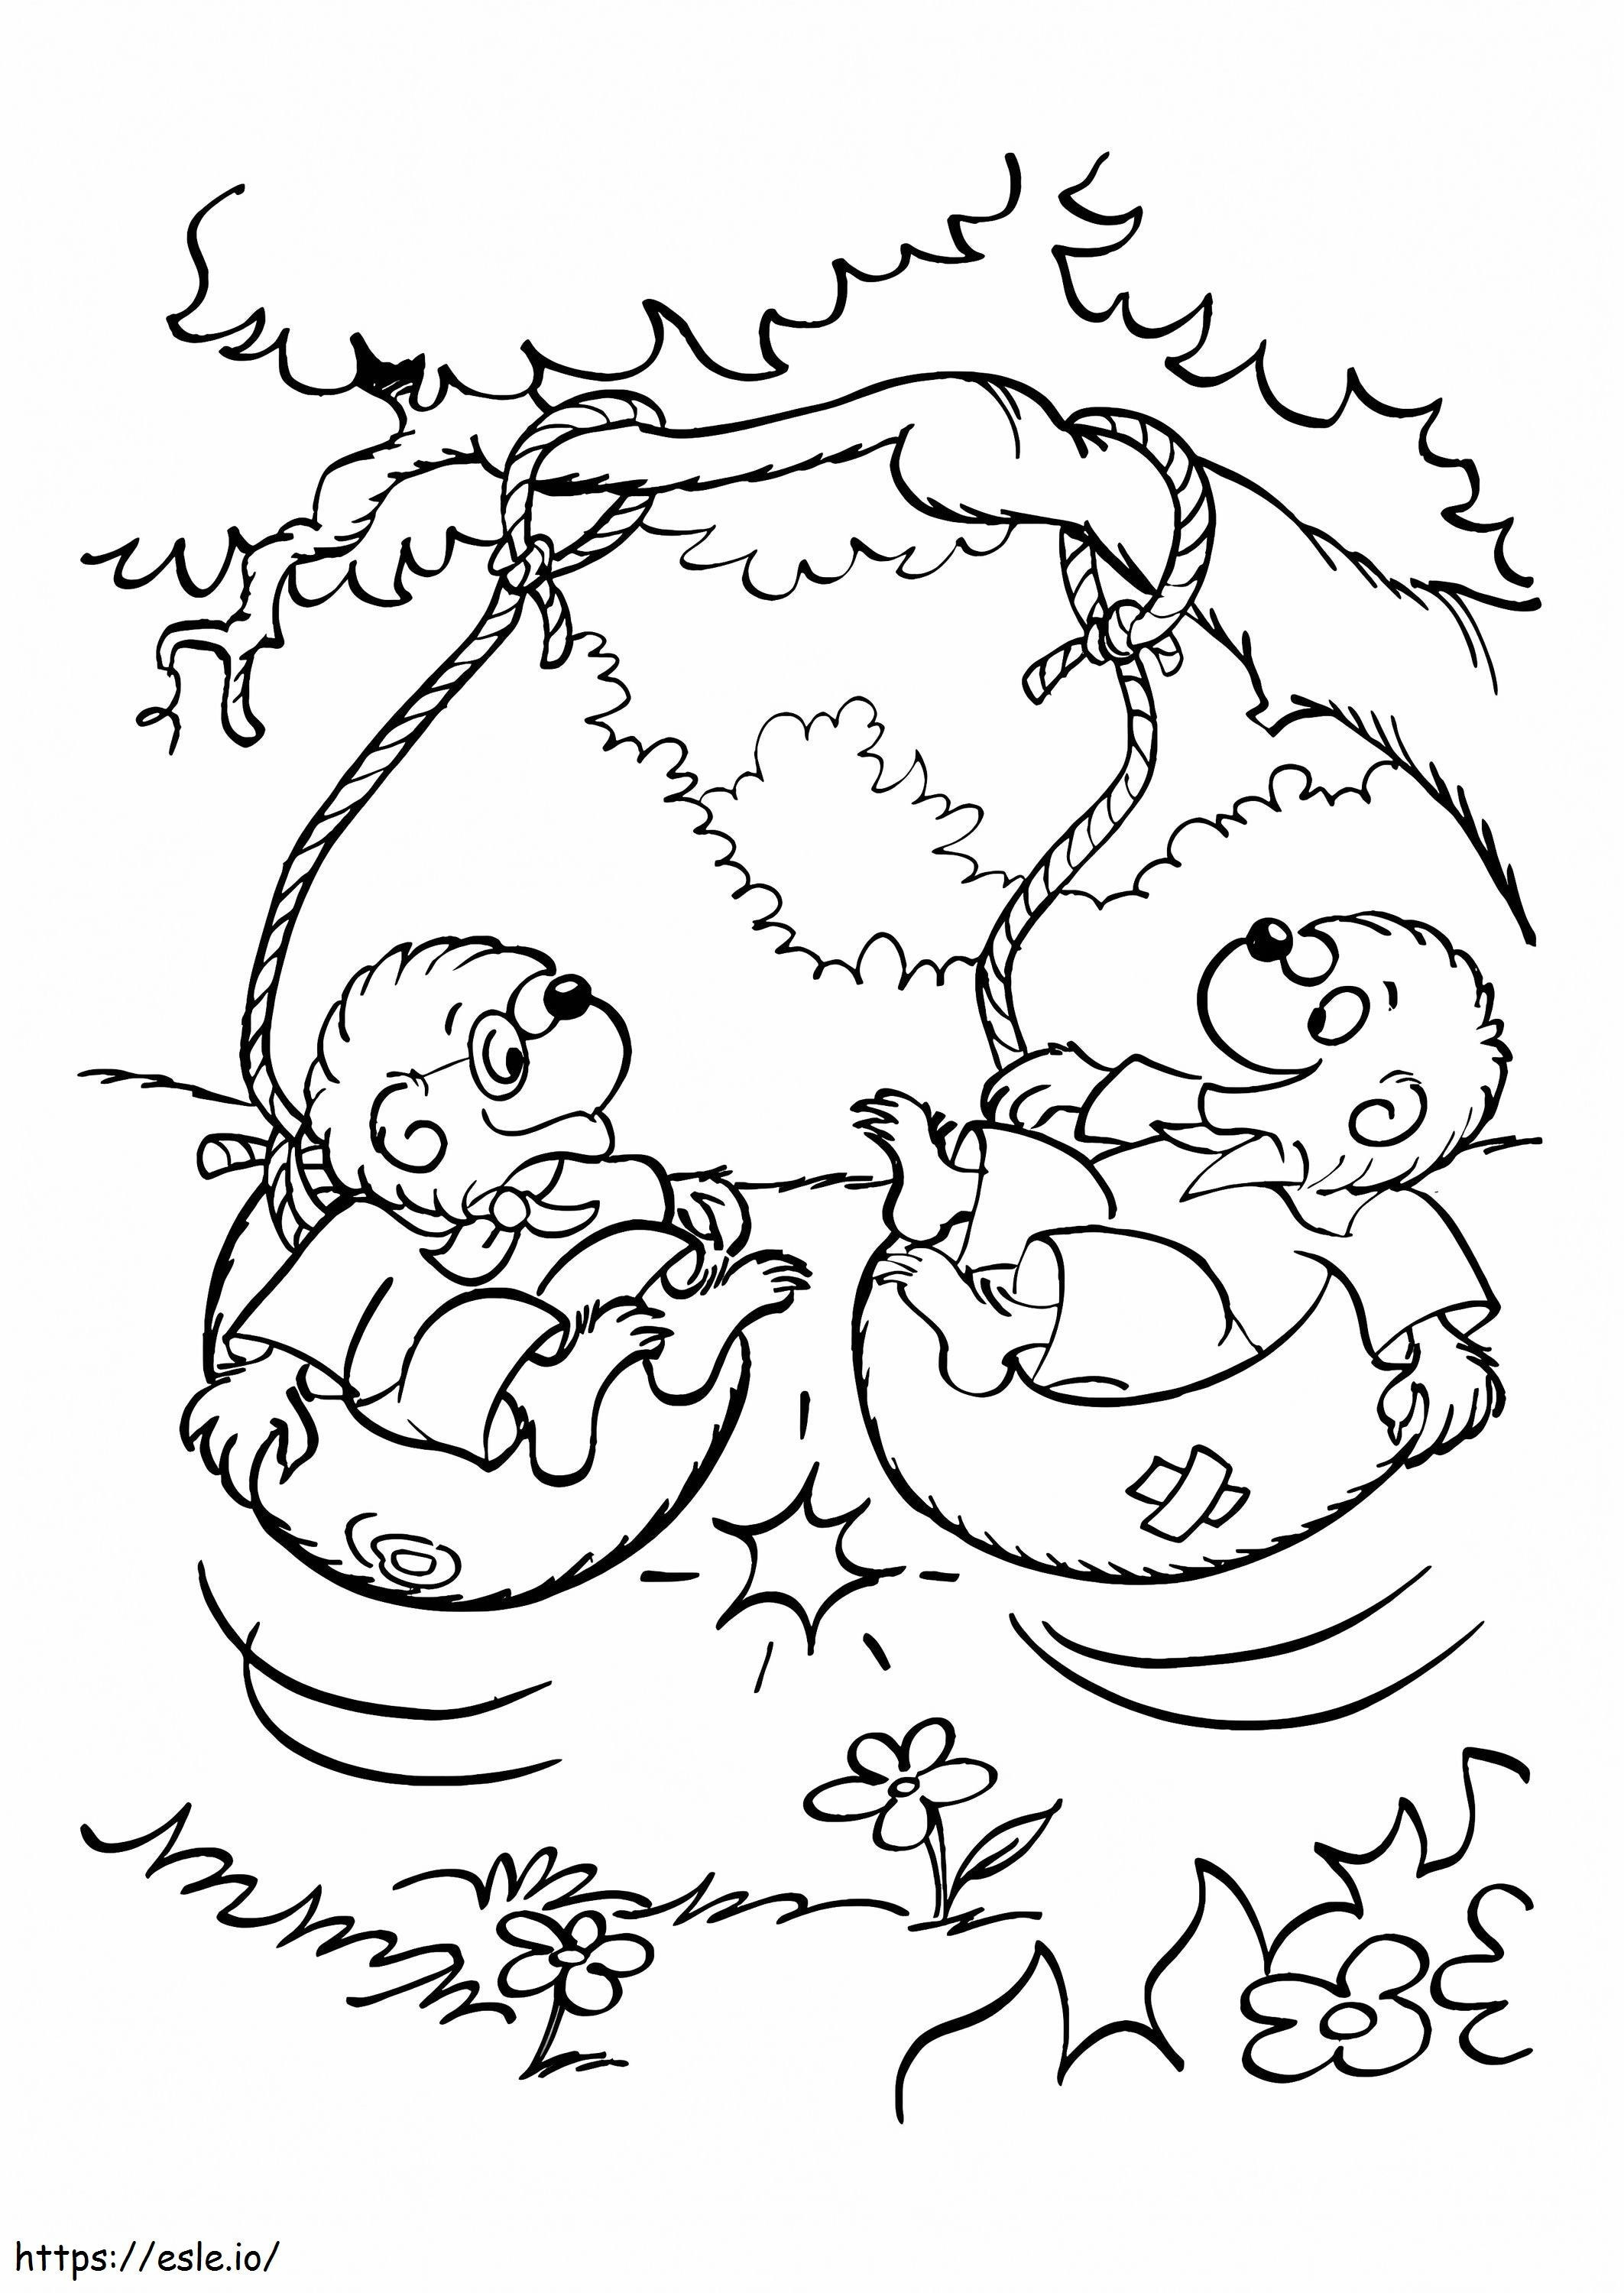 Berenstain Bears 2 coloring page